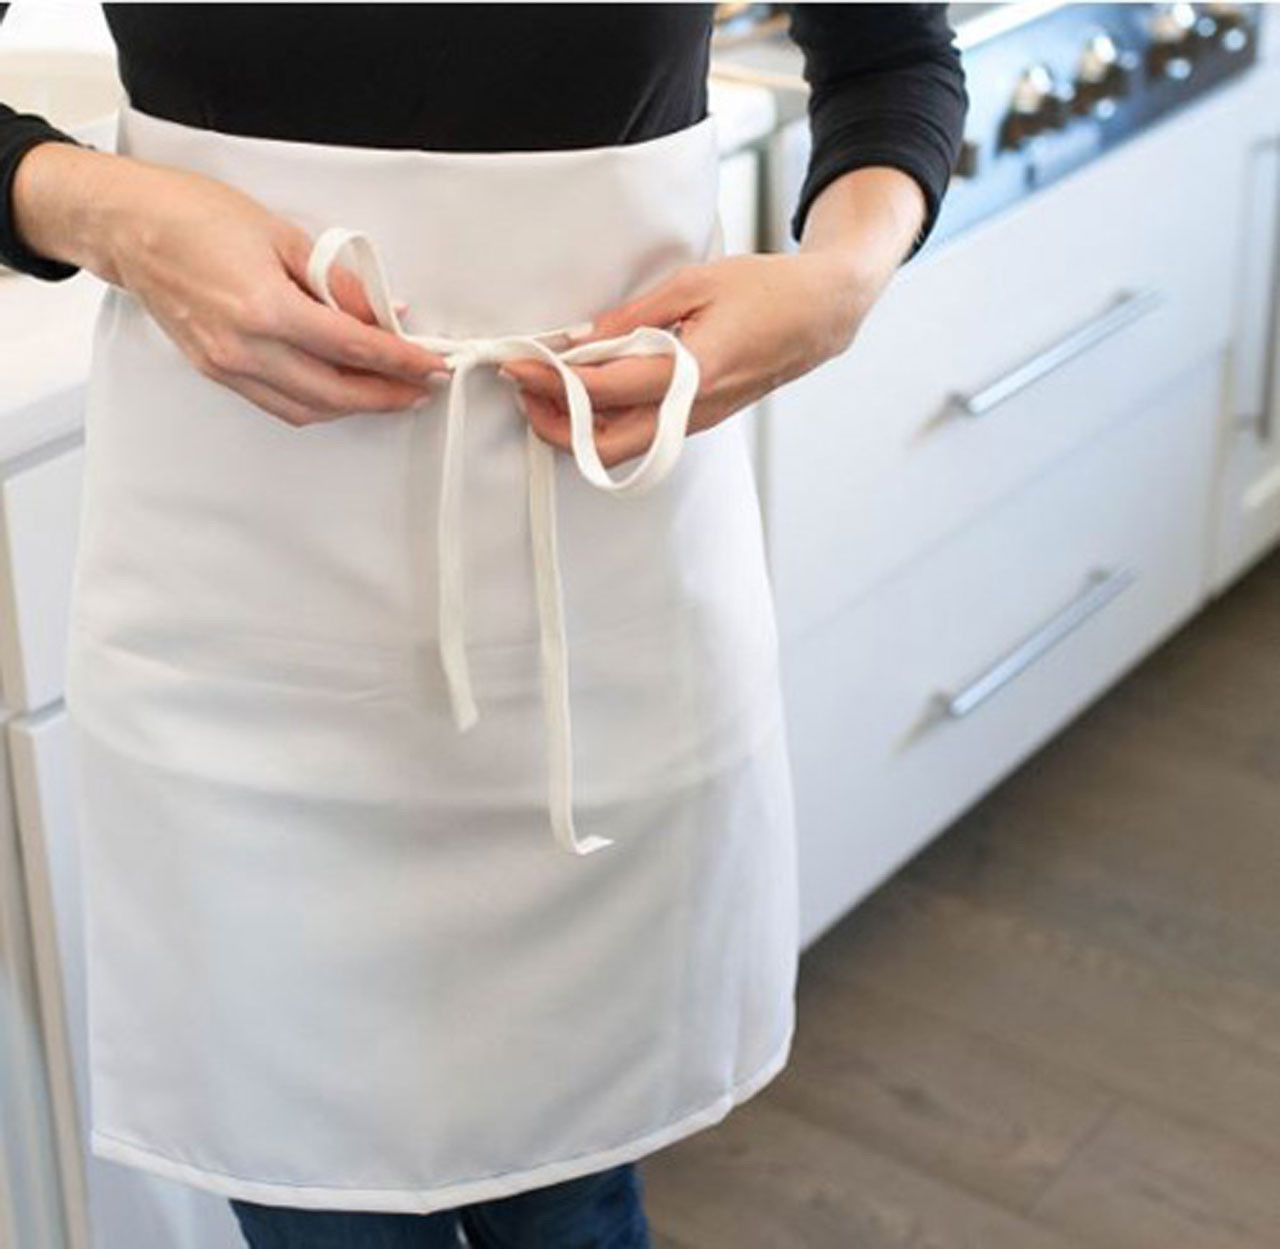 Does the 4-Way, Reversible Apron white have any specific thread detailing?